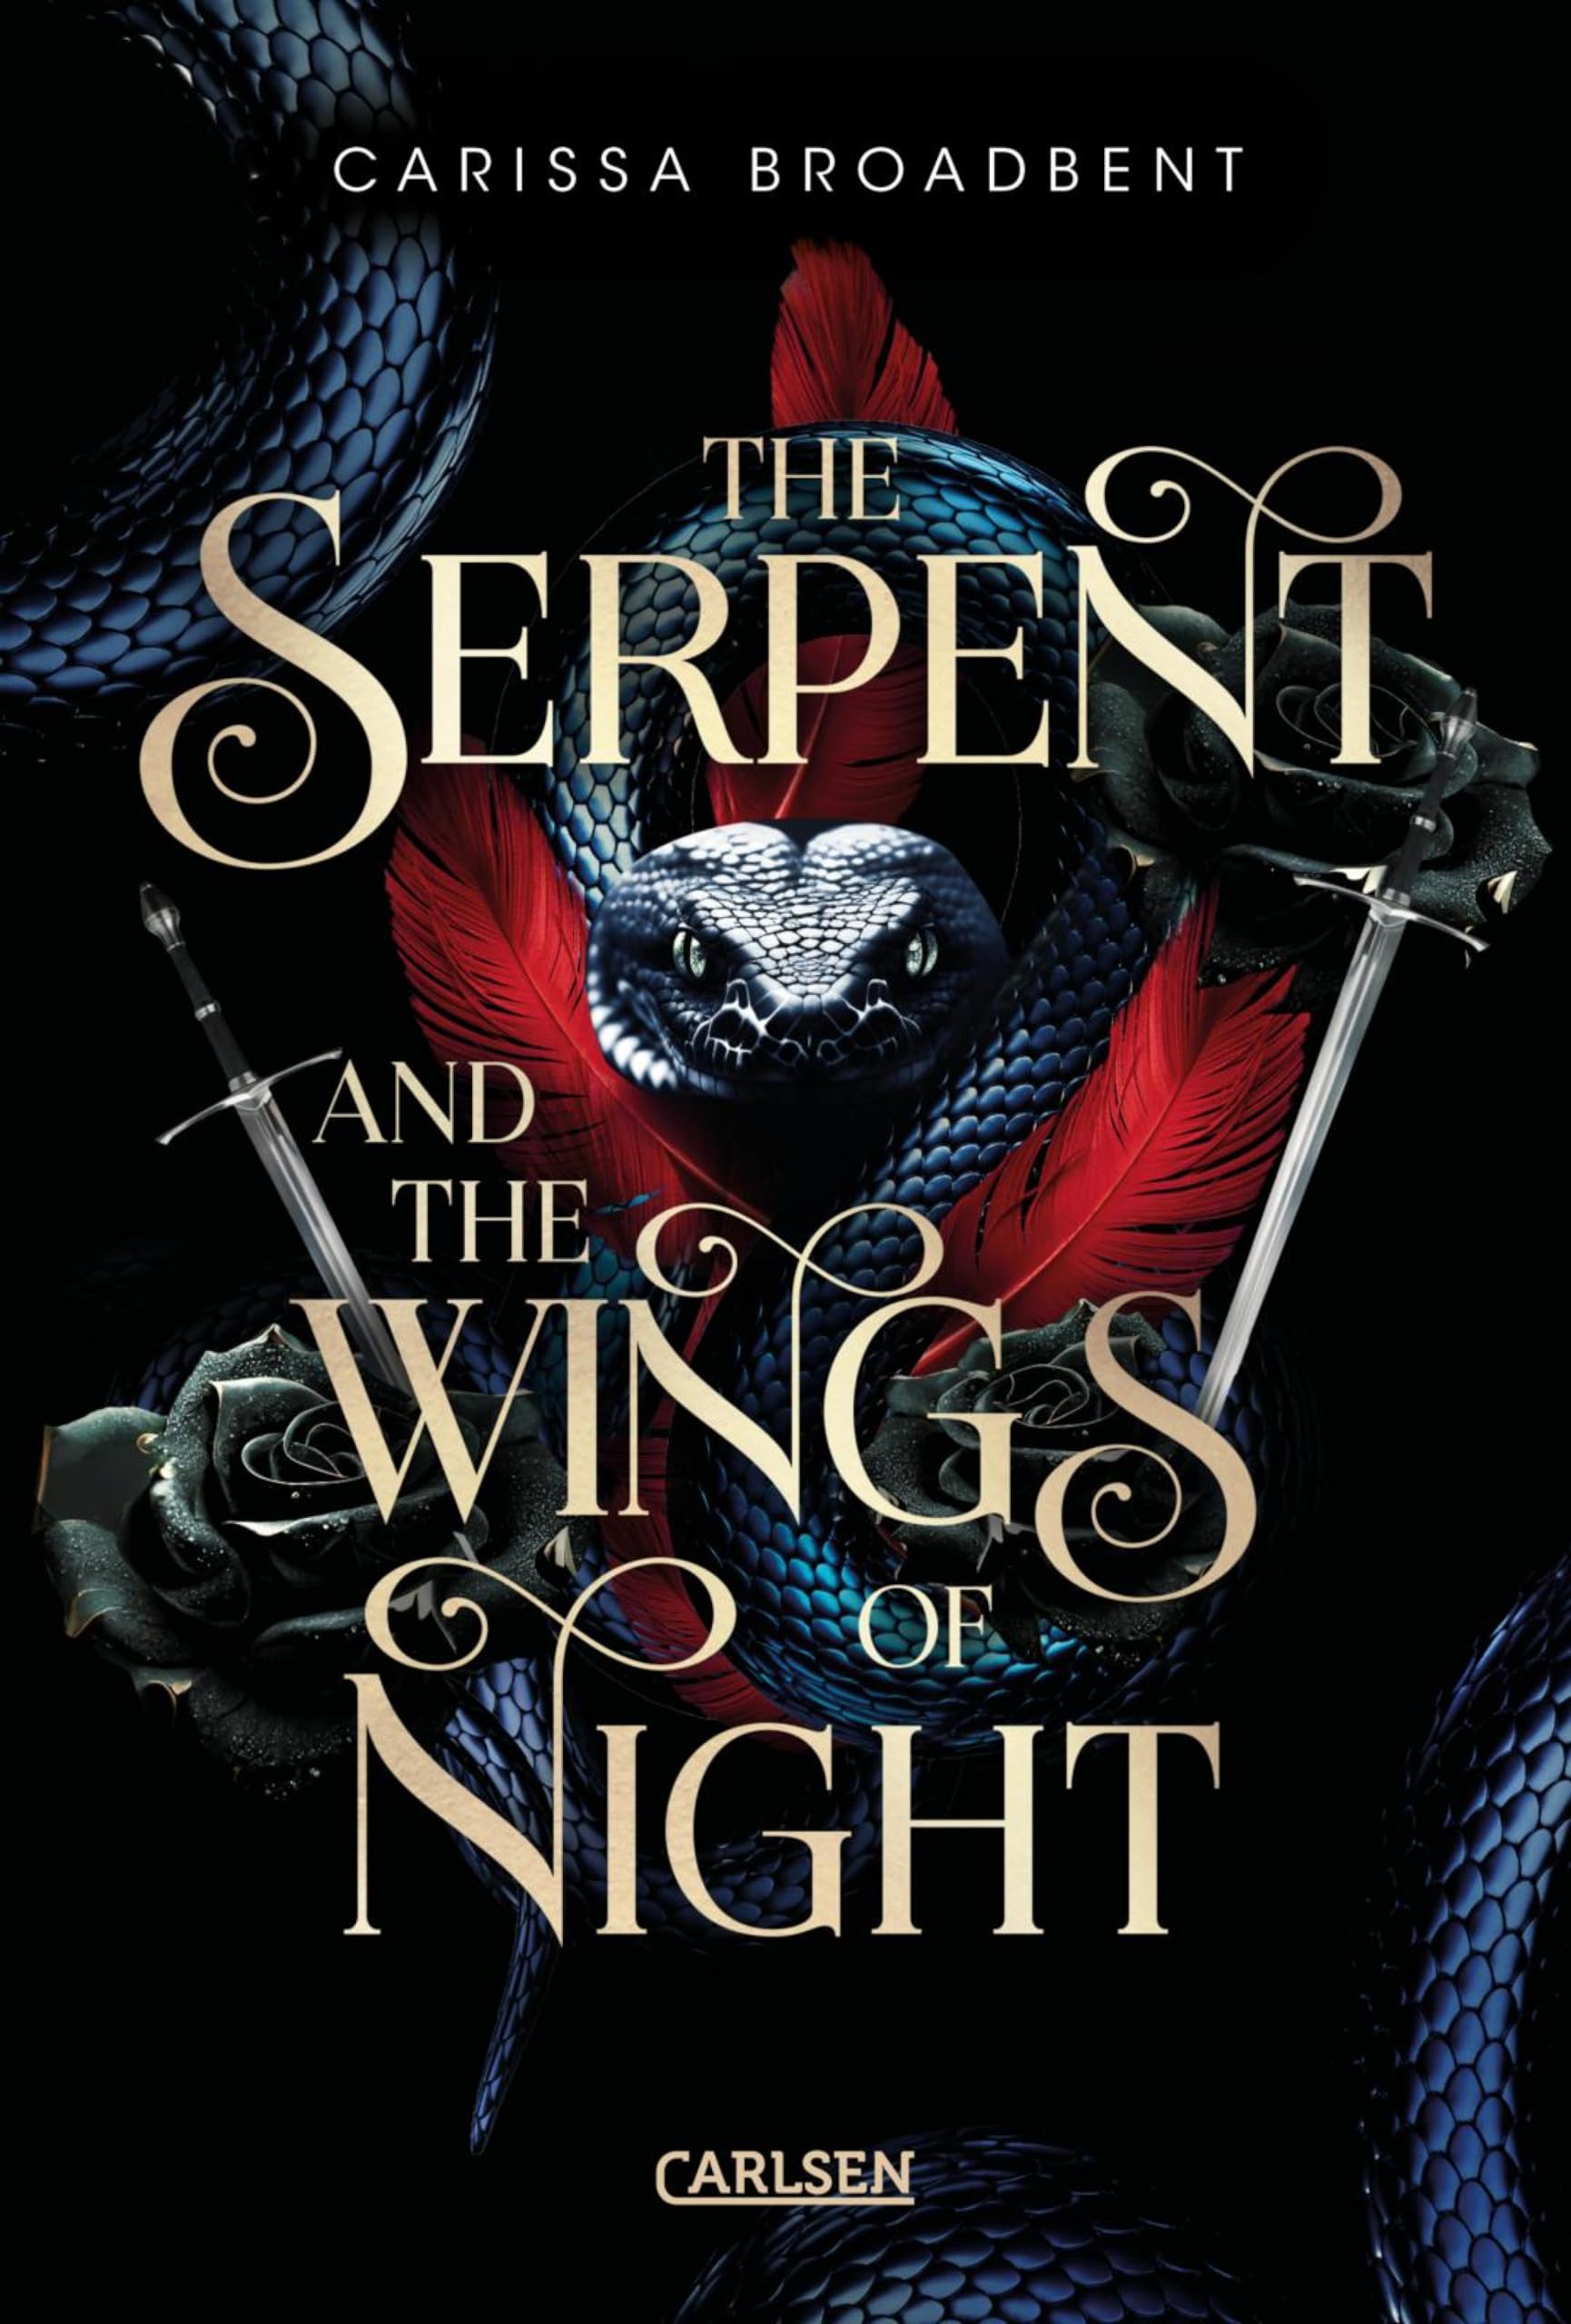 The Serpent and the Wings of Night (Crowns of Nyaxia 1): Dramatische Romantasy in düsterem High-Fantasy-Setting (German Edition)